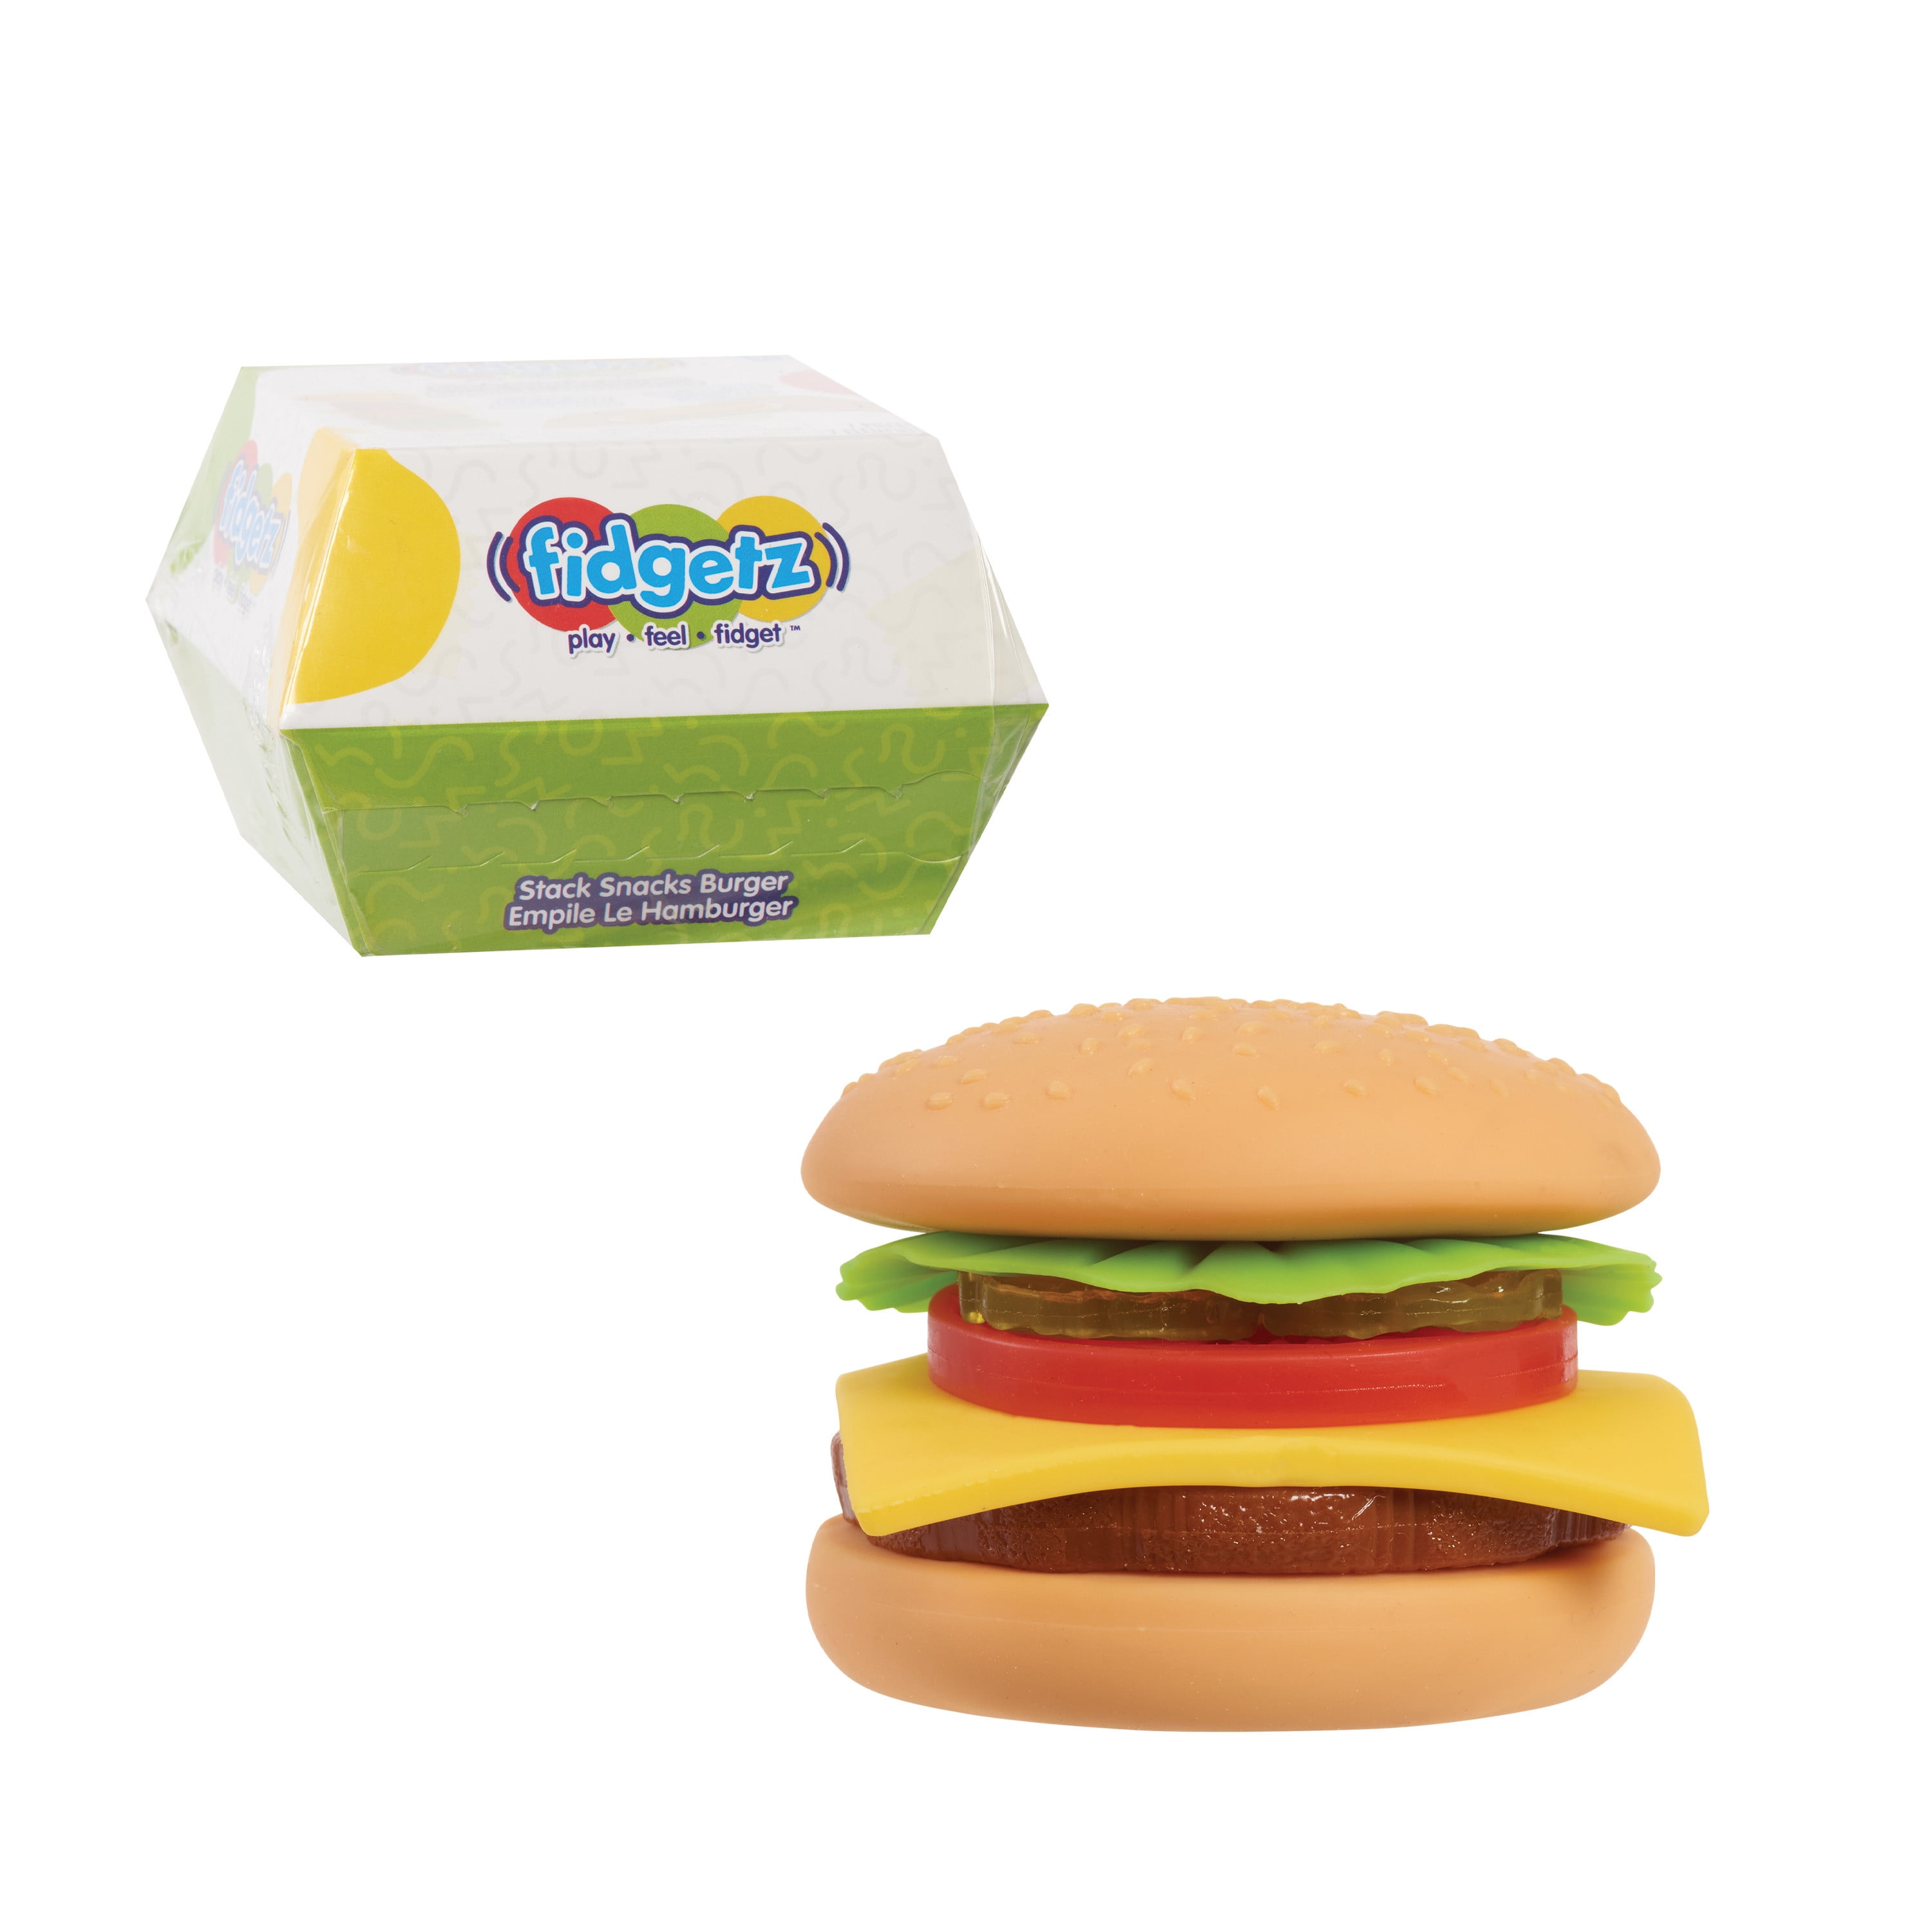 Fidgetz Snack Stacks Burger, Squishy and Stretchy Sensory Tactile Fidget,  Kids Toys for Ages 3 Up, Gifts and Presents